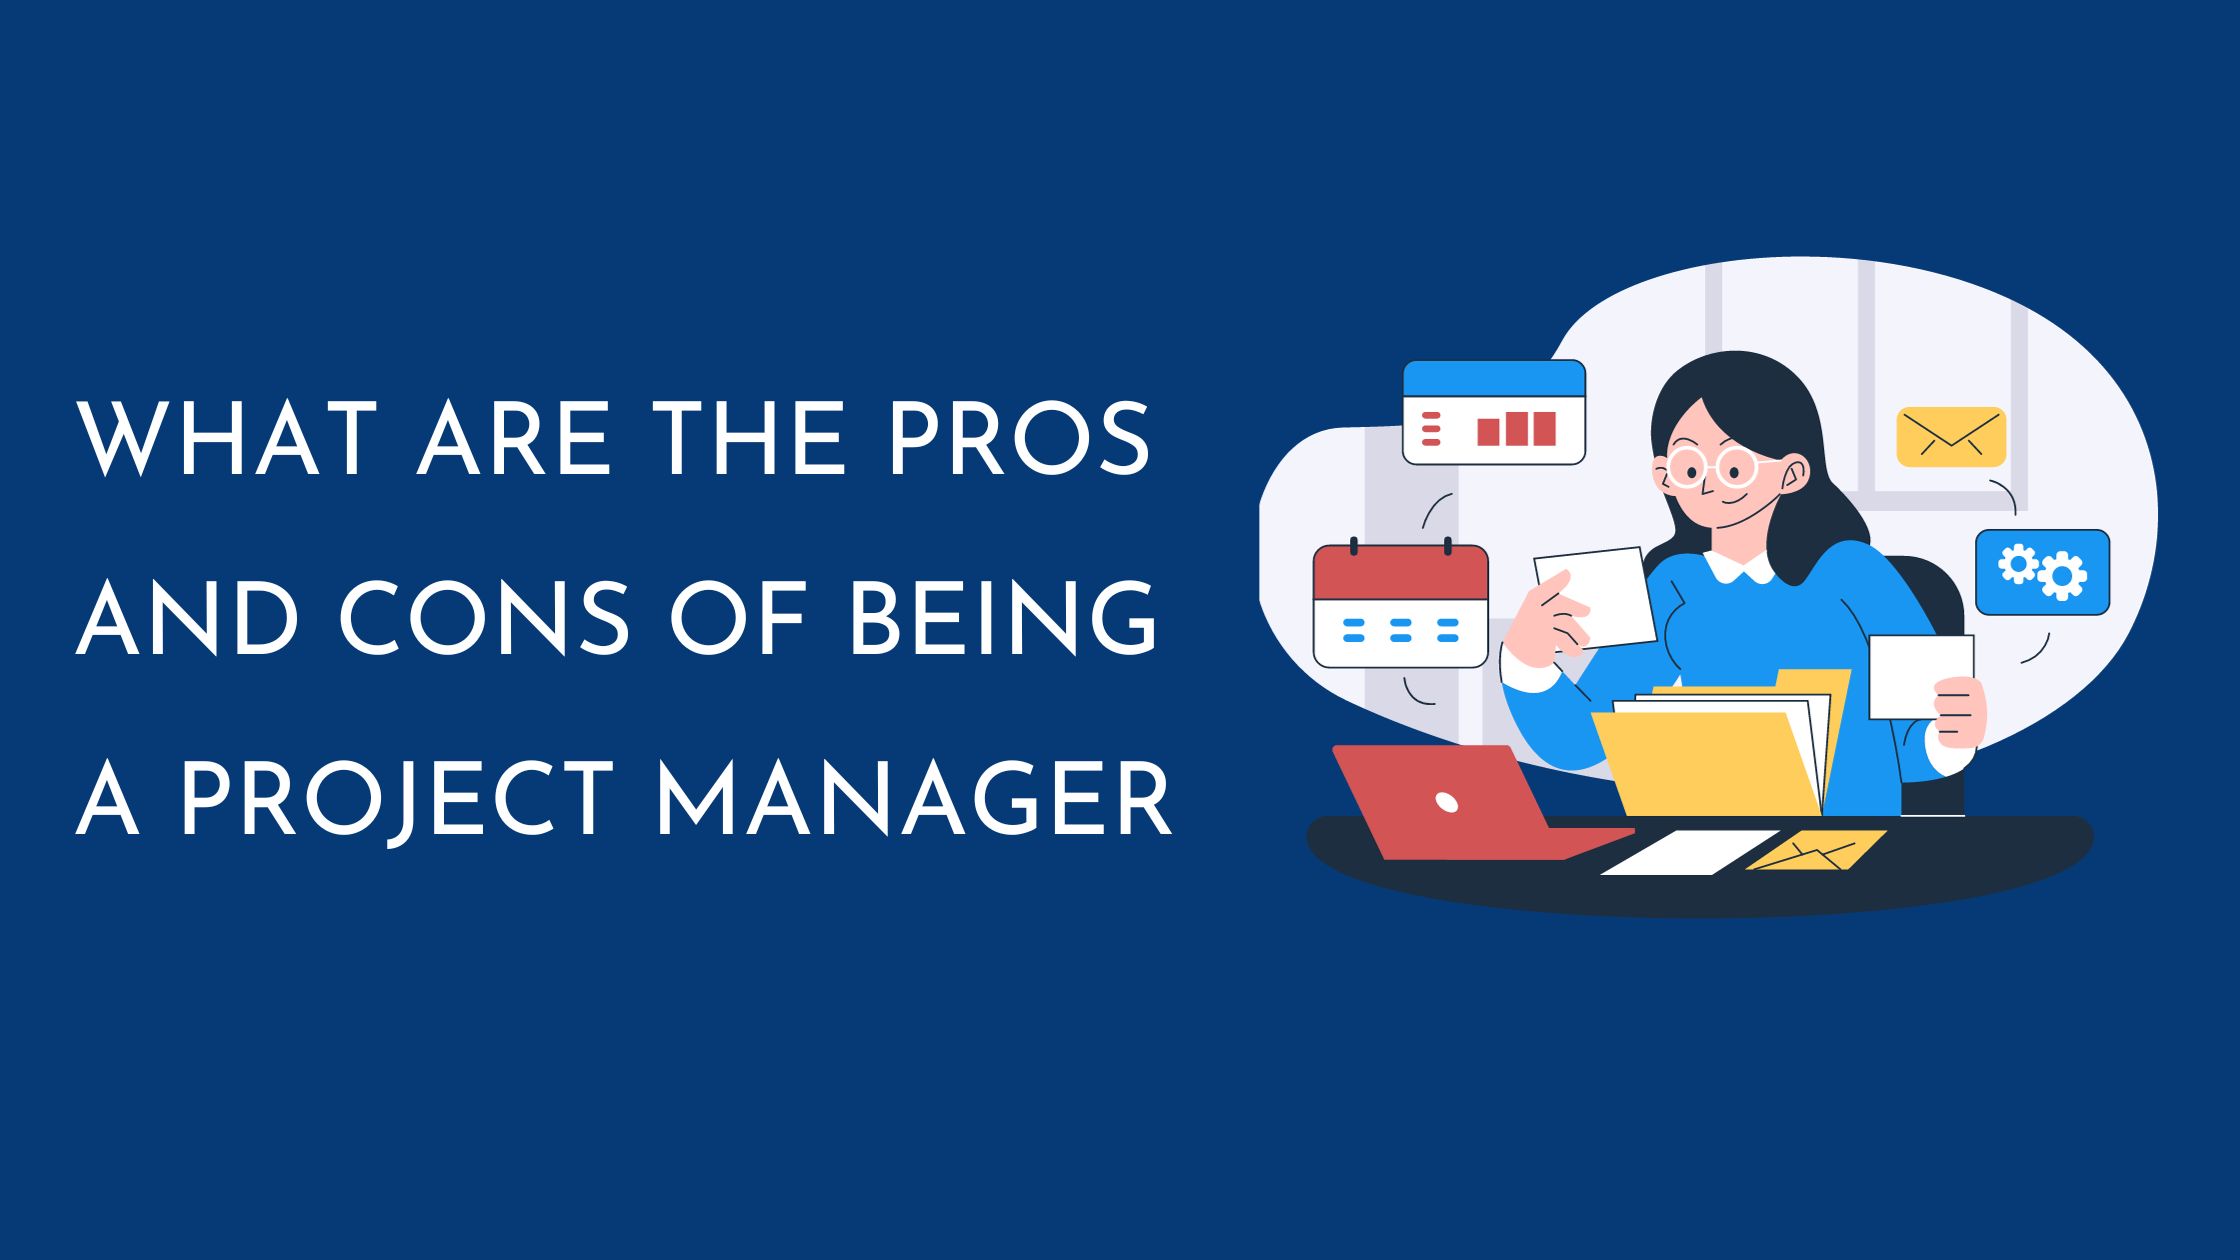 What Are the Pros and Cons of Being a Project Manager